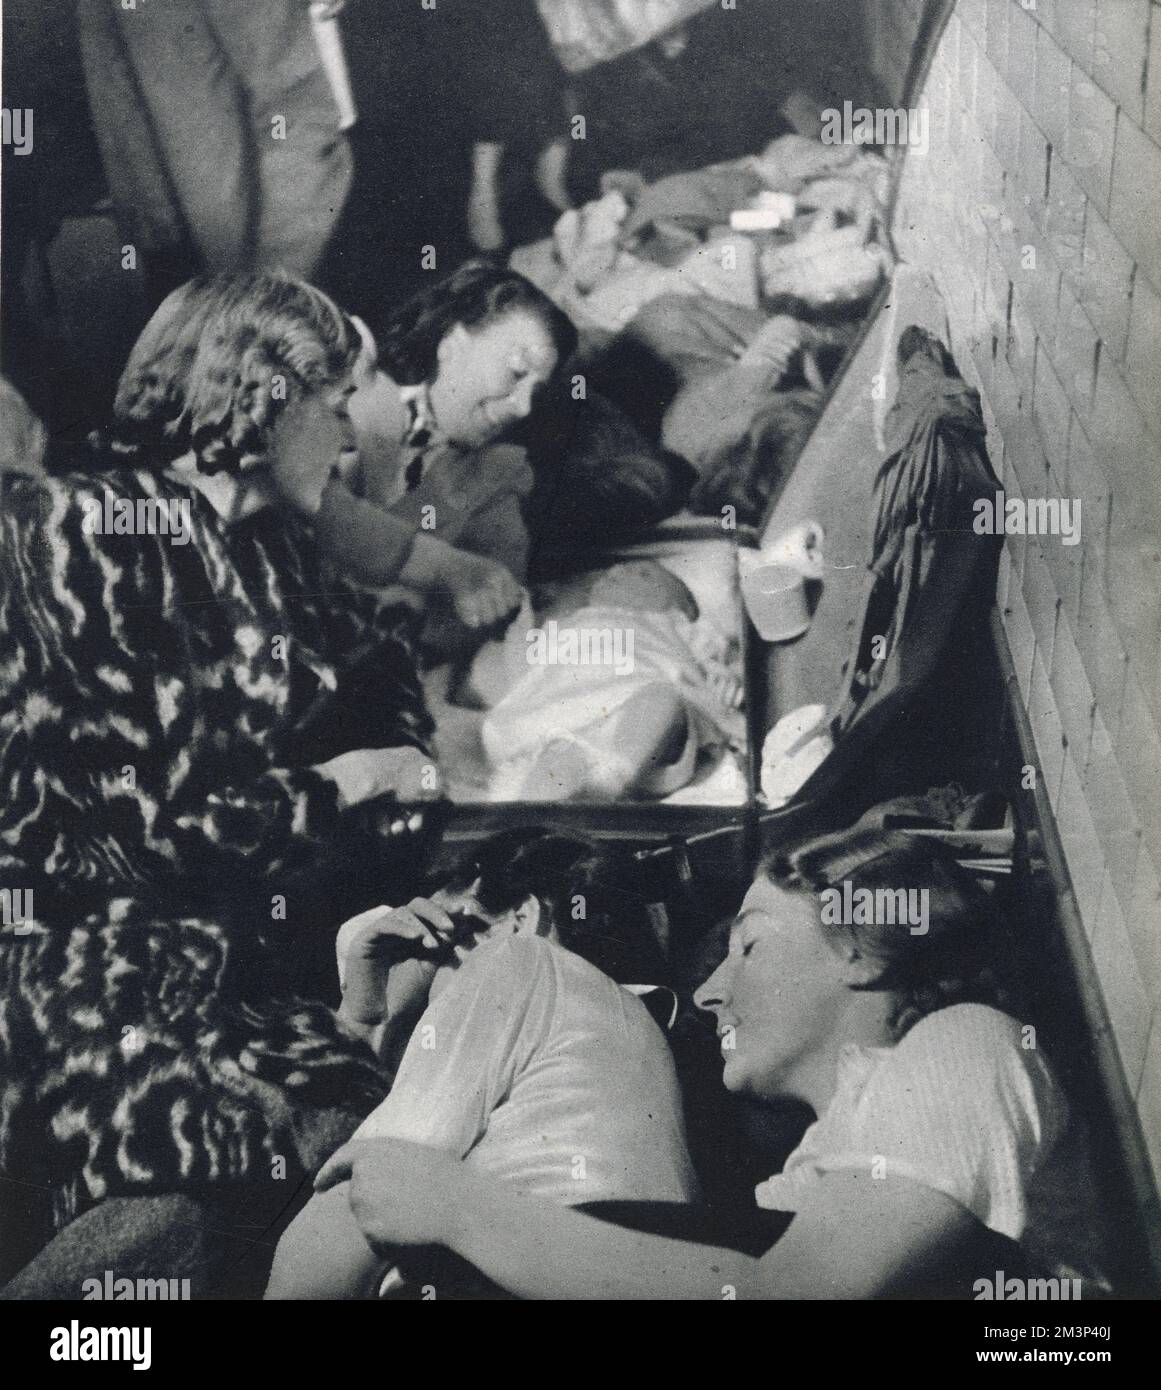 German bombing campaign against Britain between September 1940 and May 1941 mainly targeting London and industrial places. Photograph showing women sleeping in cramped conditions in a underground tube station and mother watching over a baby in a suit-case.      Date: October 1940 Stock Photo